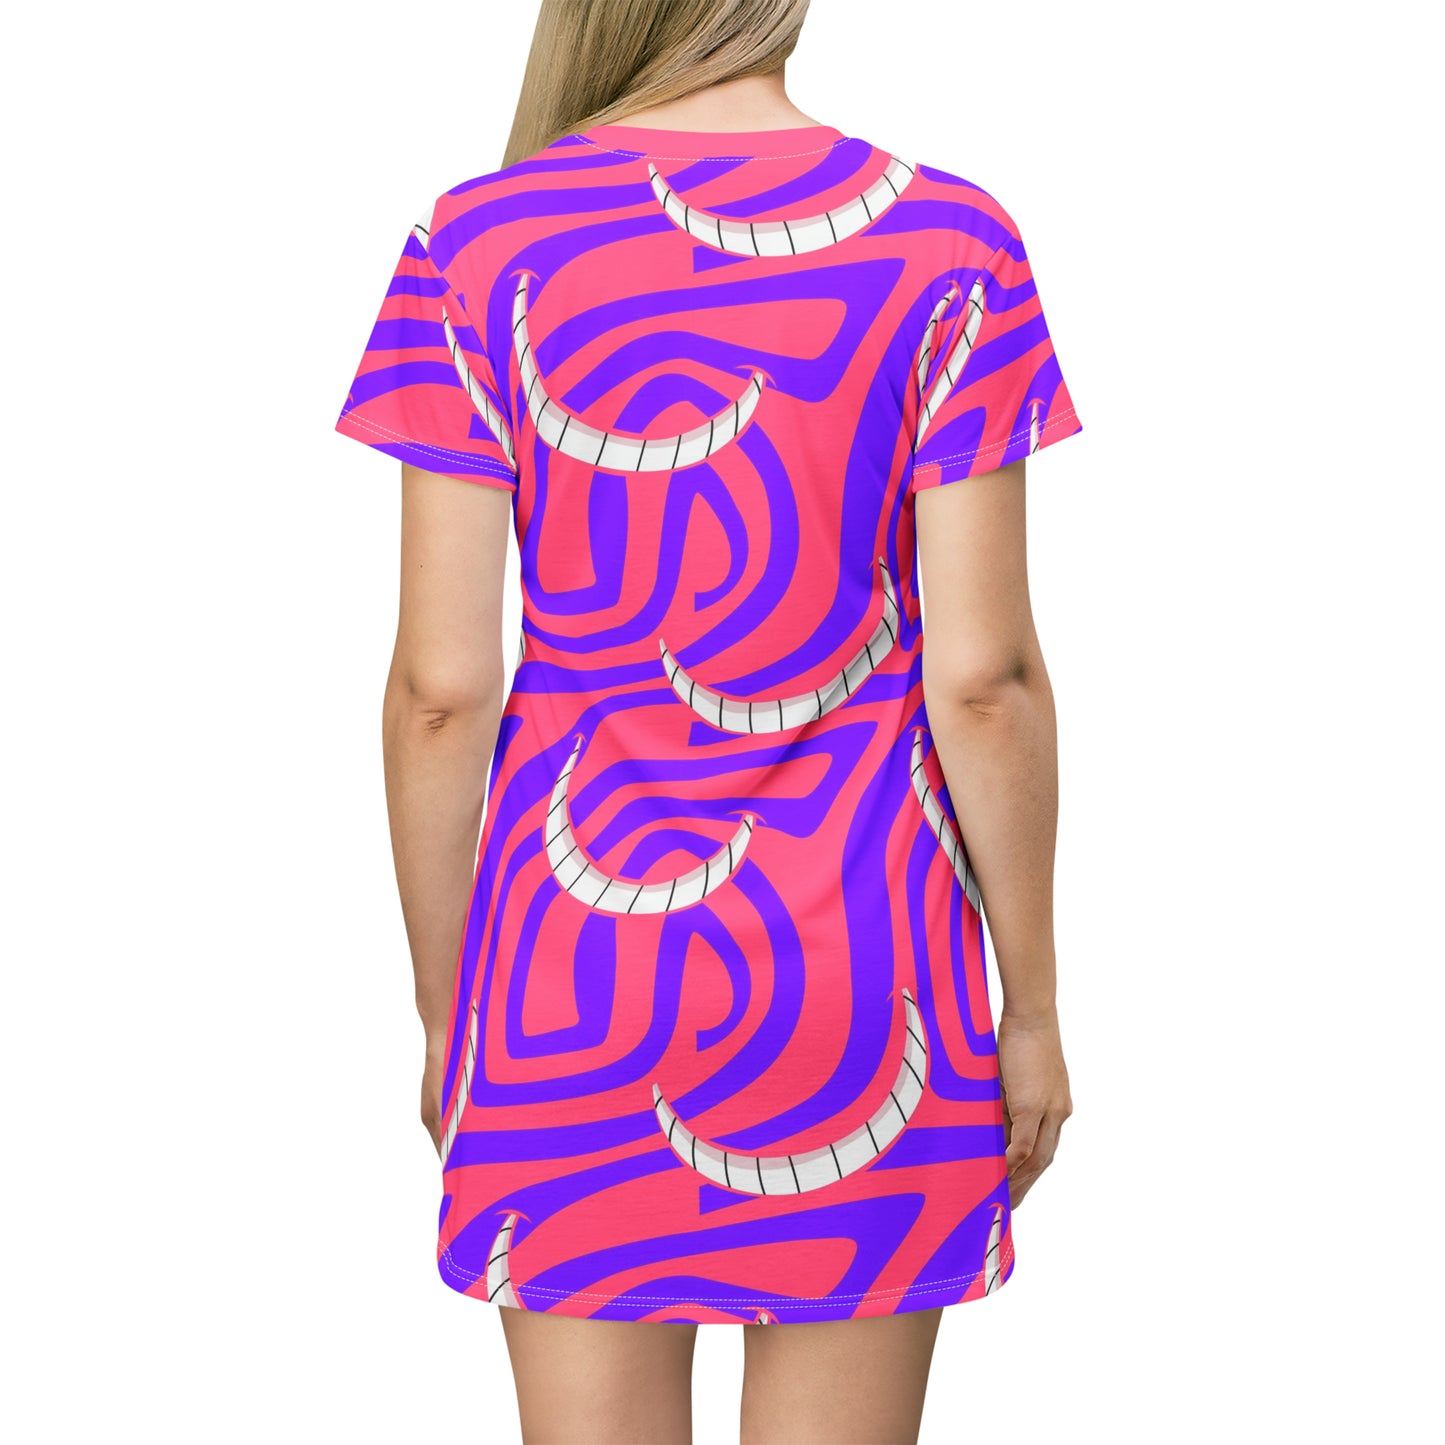 All Mad Here T-Shirt Dress